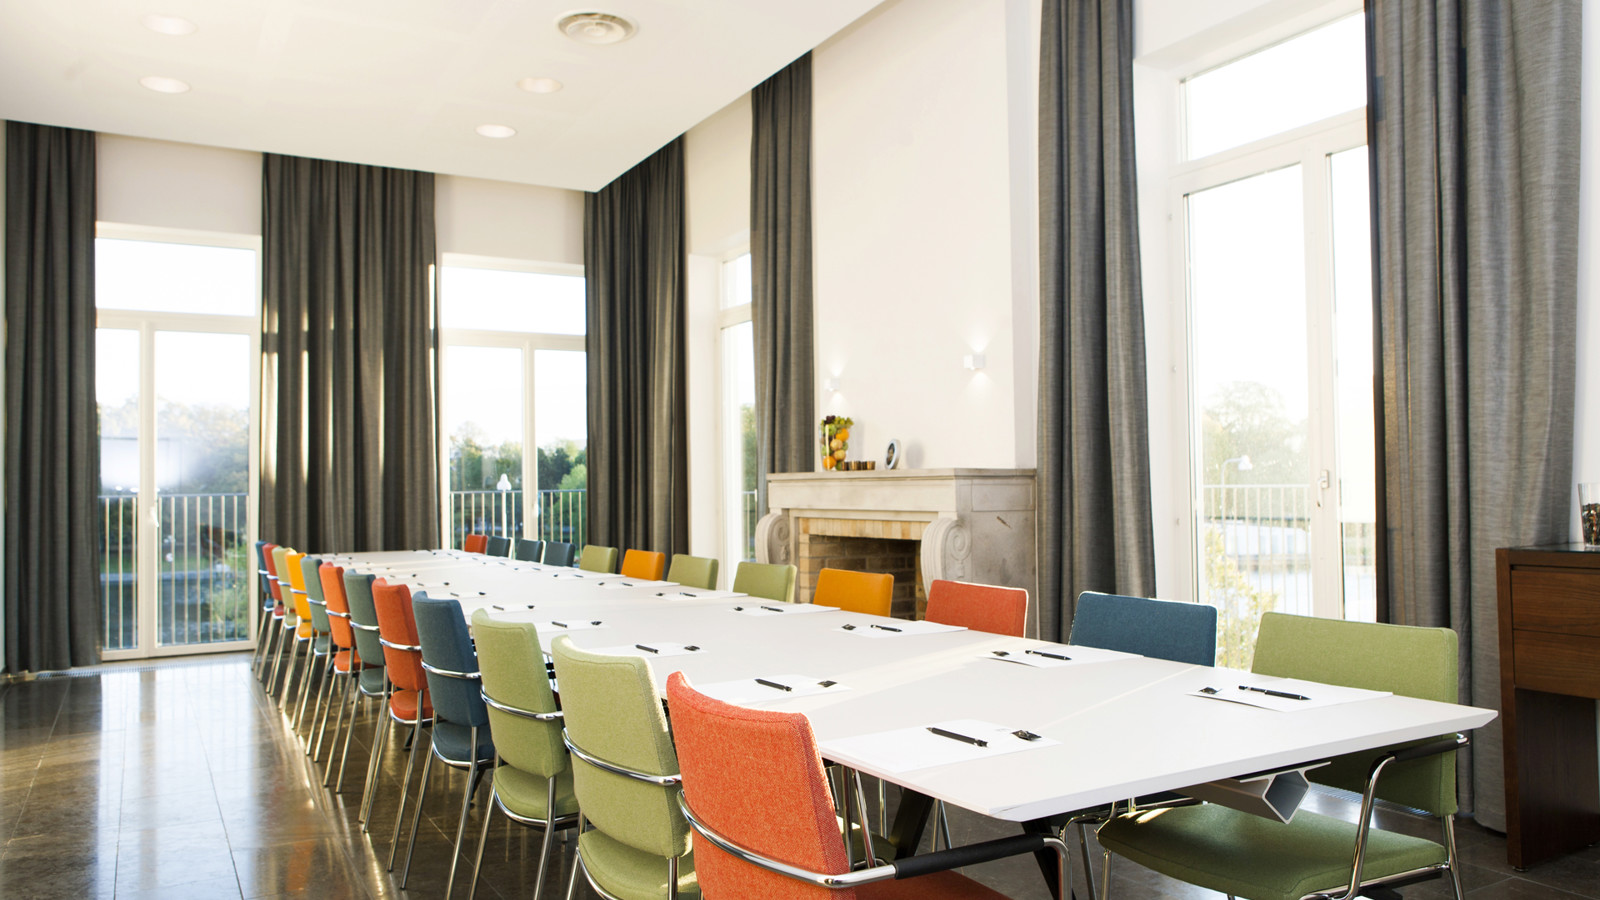 Big table with colourful chairs and grey curtains